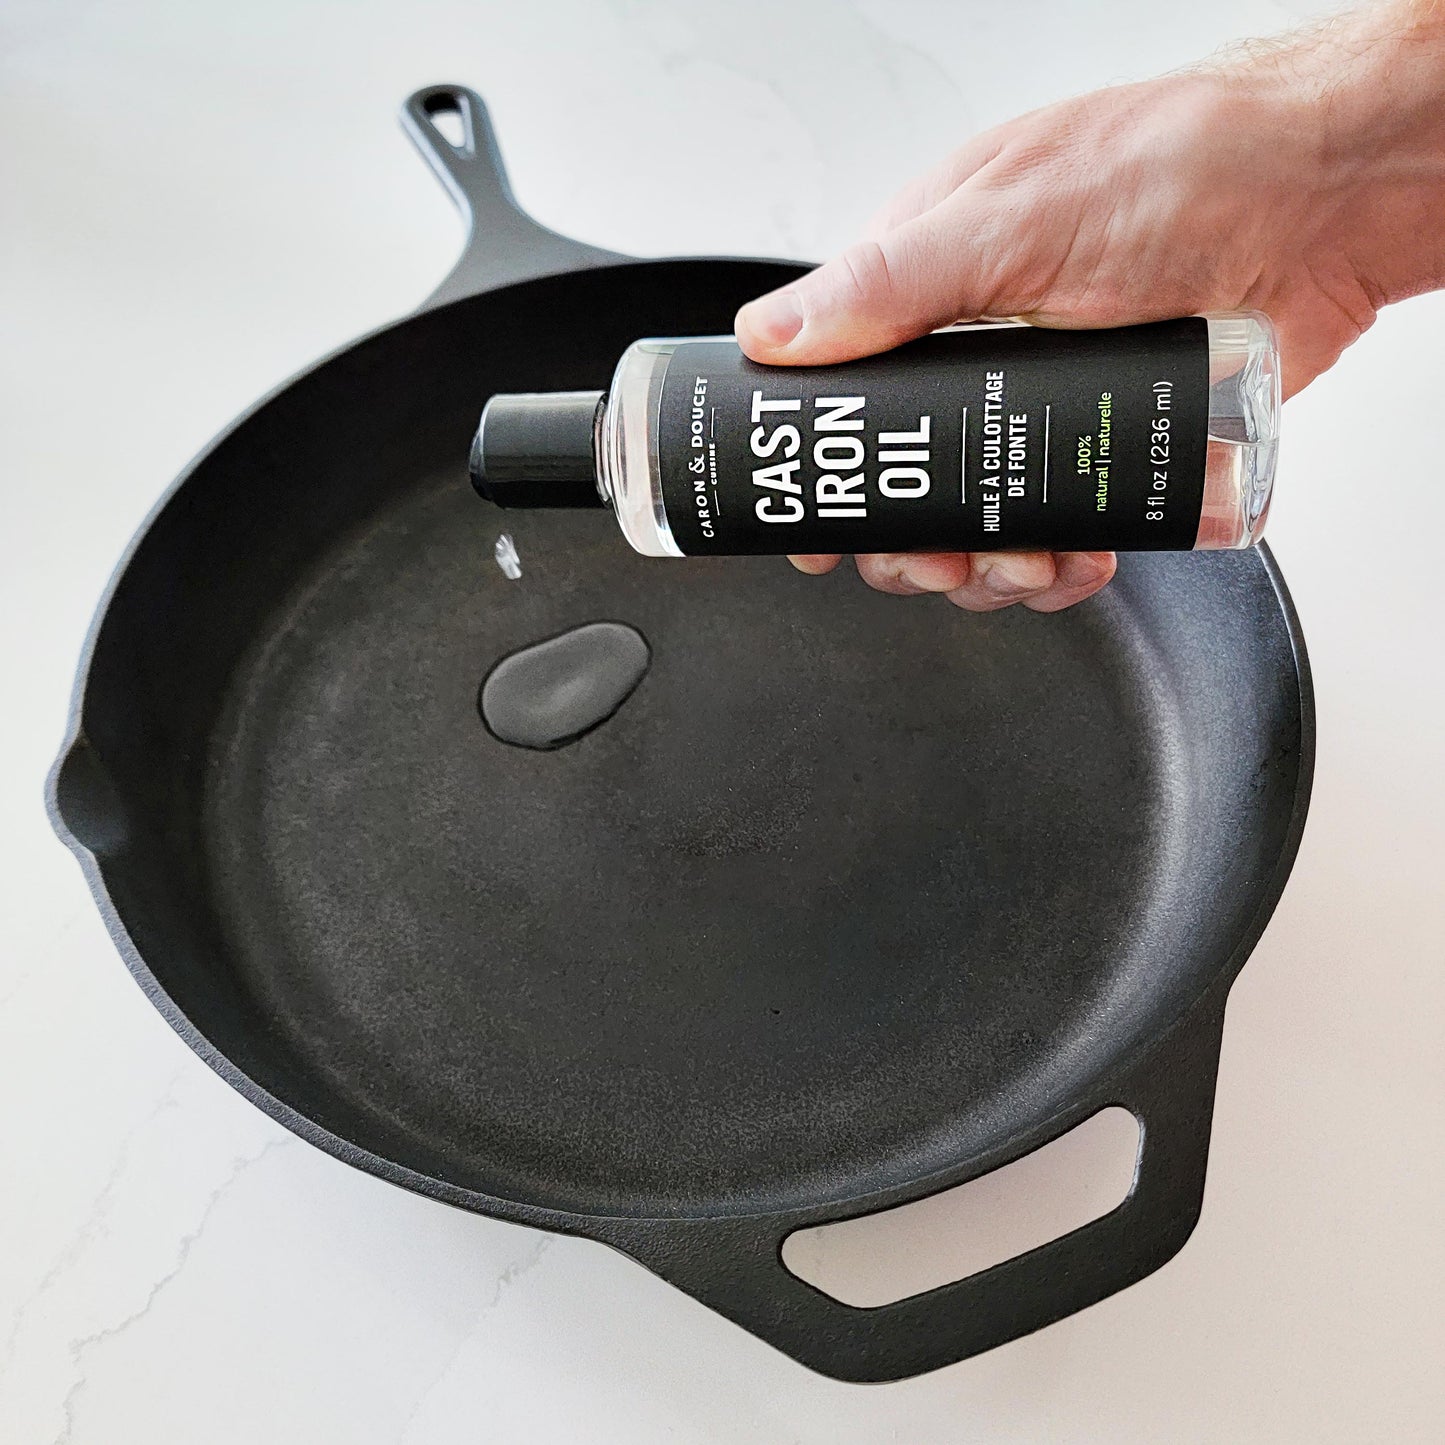 Culina Cast Iron Seasoning Stick & Soap & Oil Conditioner & Restoring Scrub & Stainless Scrubber | All Natural Ingredients | Best for Cleaning, Non-S